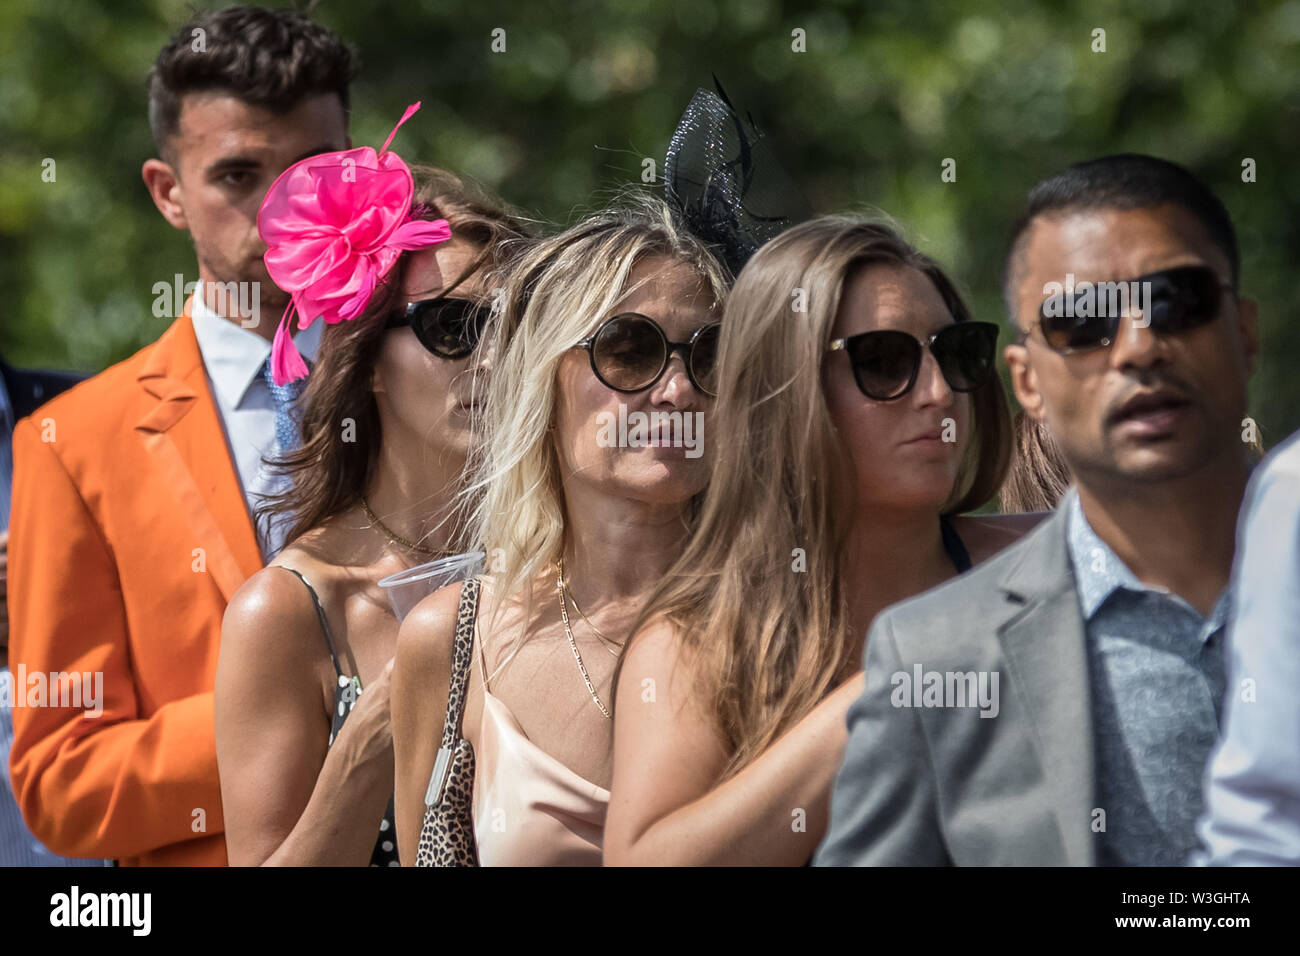 Arriving for Henley Royal Regatta 2019 in Oxfordshire. The five day Henley Royal Regatta is now in its 180th year. The event is one of the highlights of the English social season. UK. Stock Photo